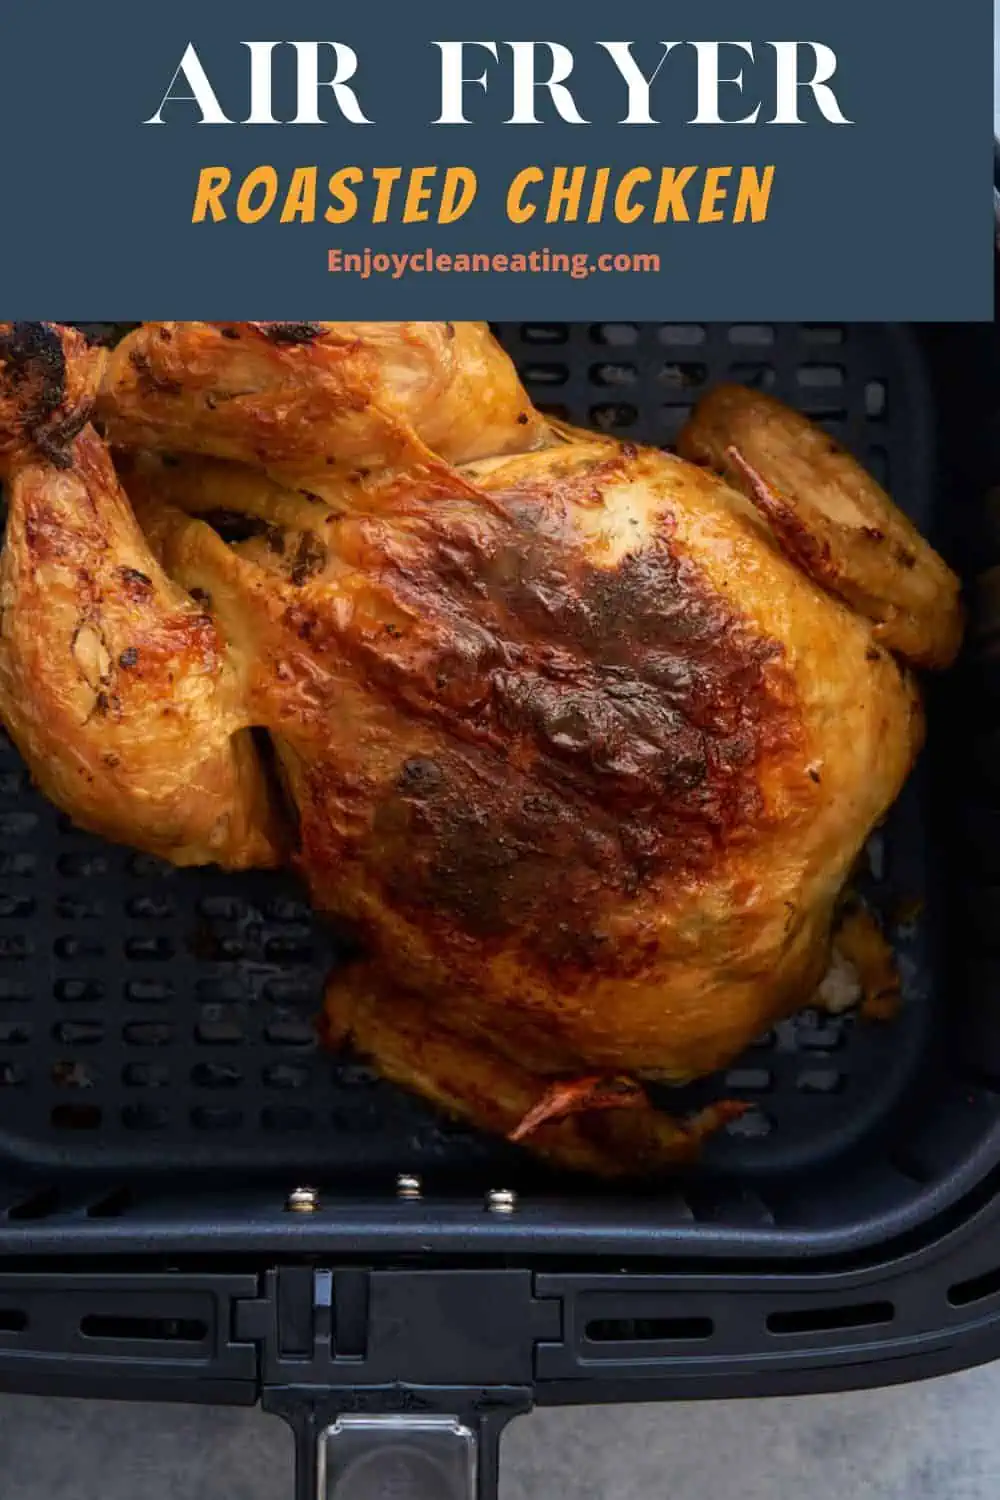 In the air fryer basket a roasted chicken.